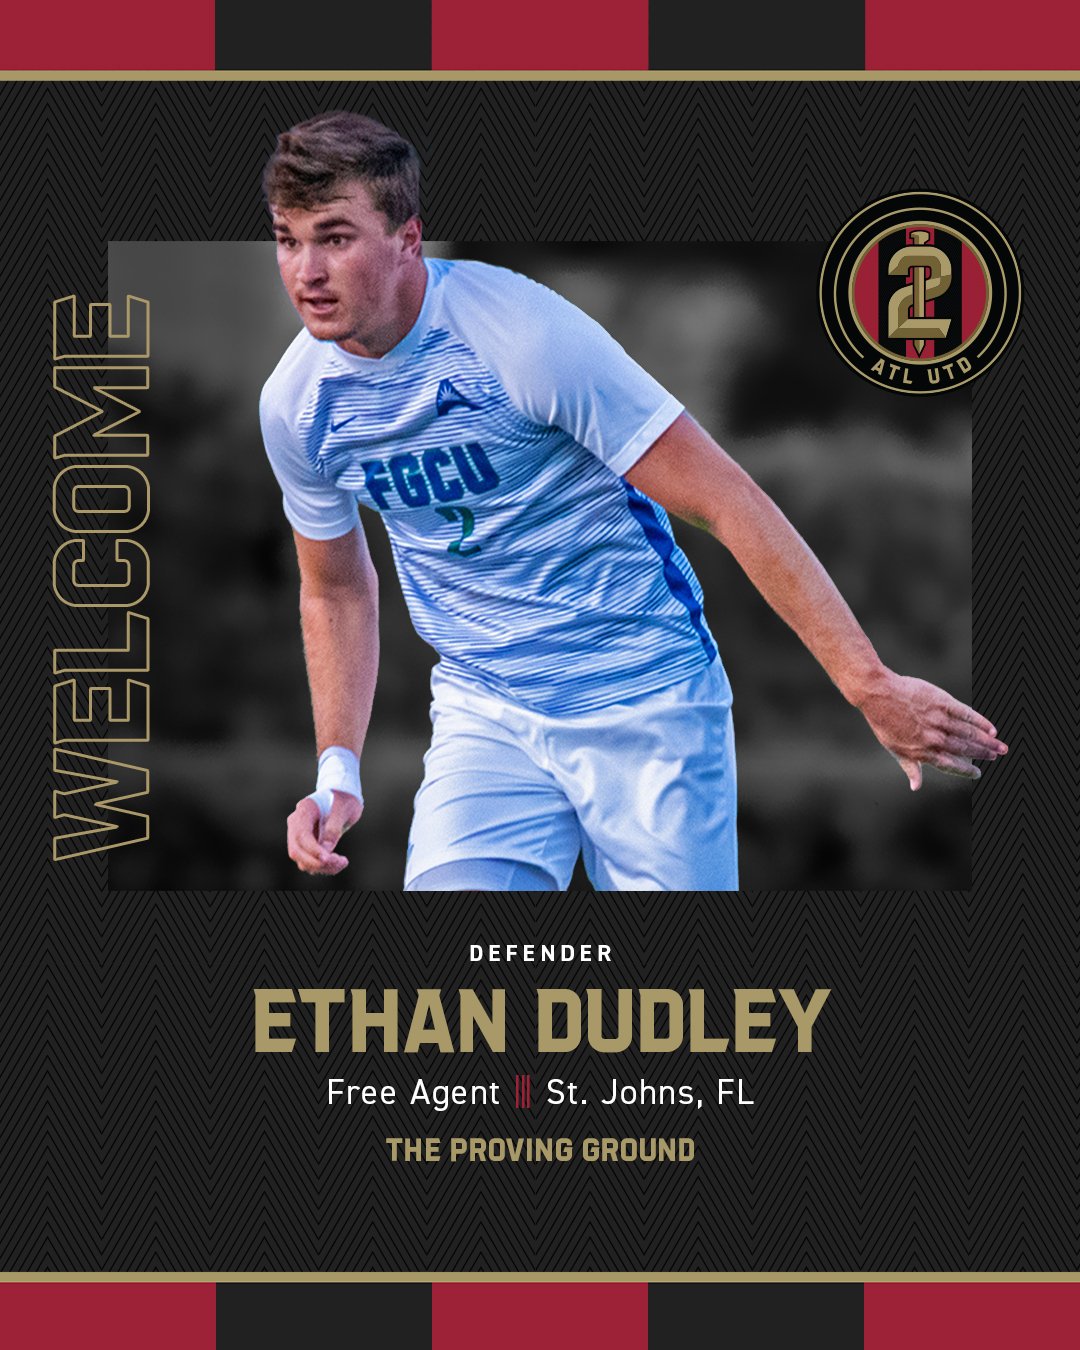 Congrats to JFC Alumn, Ethan Dudley, on signing with Atlanta United 2!!!! Well done Ethan, we are looking forward to watching you play for ATL UTD 2!!!

#PlayerDriven #904JFC